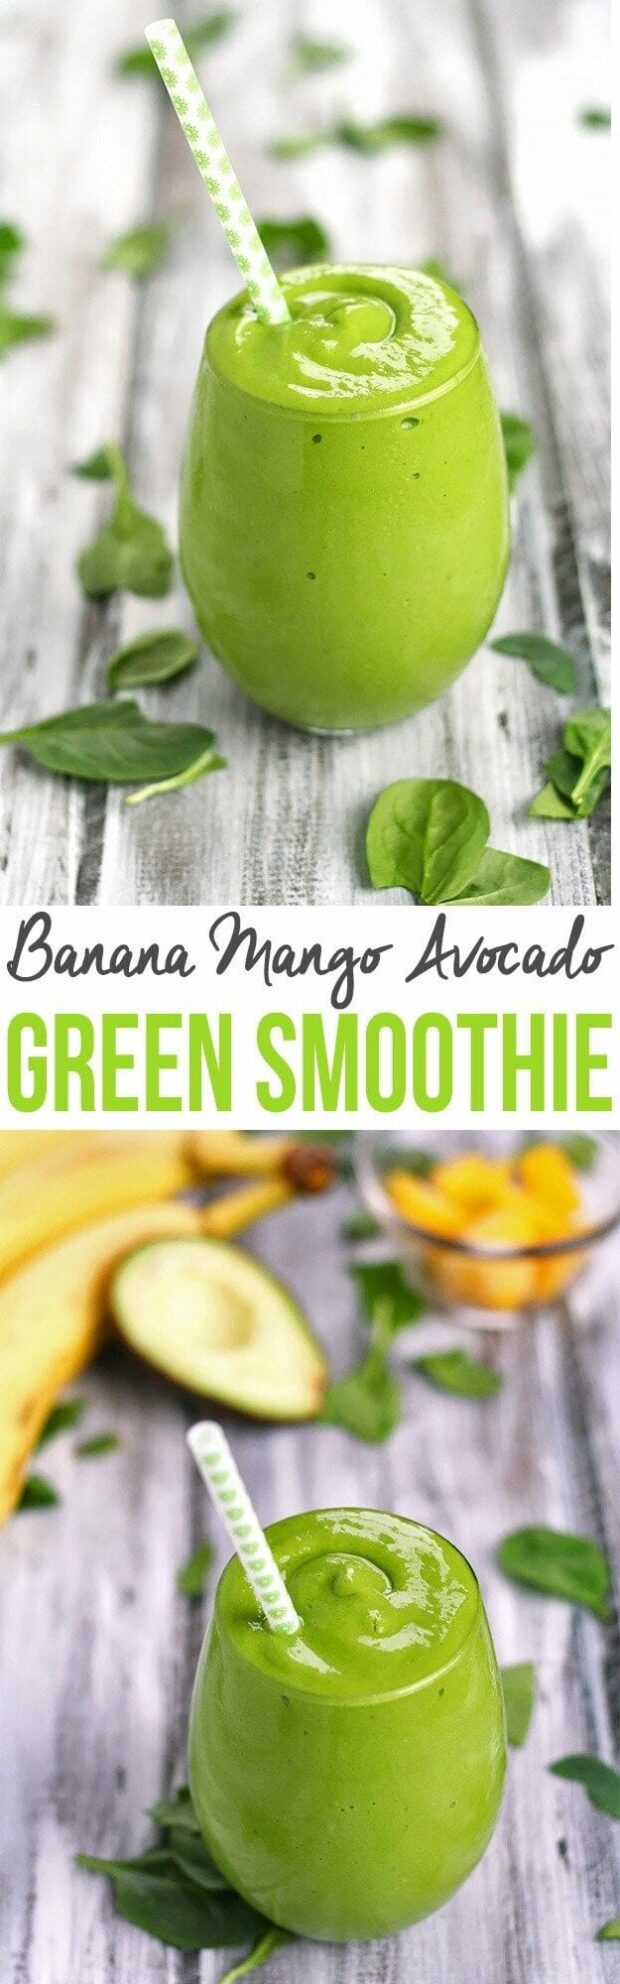 The Best Green Smoothie Recipes: 15 Great Ideas (Part 1) - smoothie recipes, Healthy Smoothie Recipes, Green Smoothie Recipes, Green Smoothie